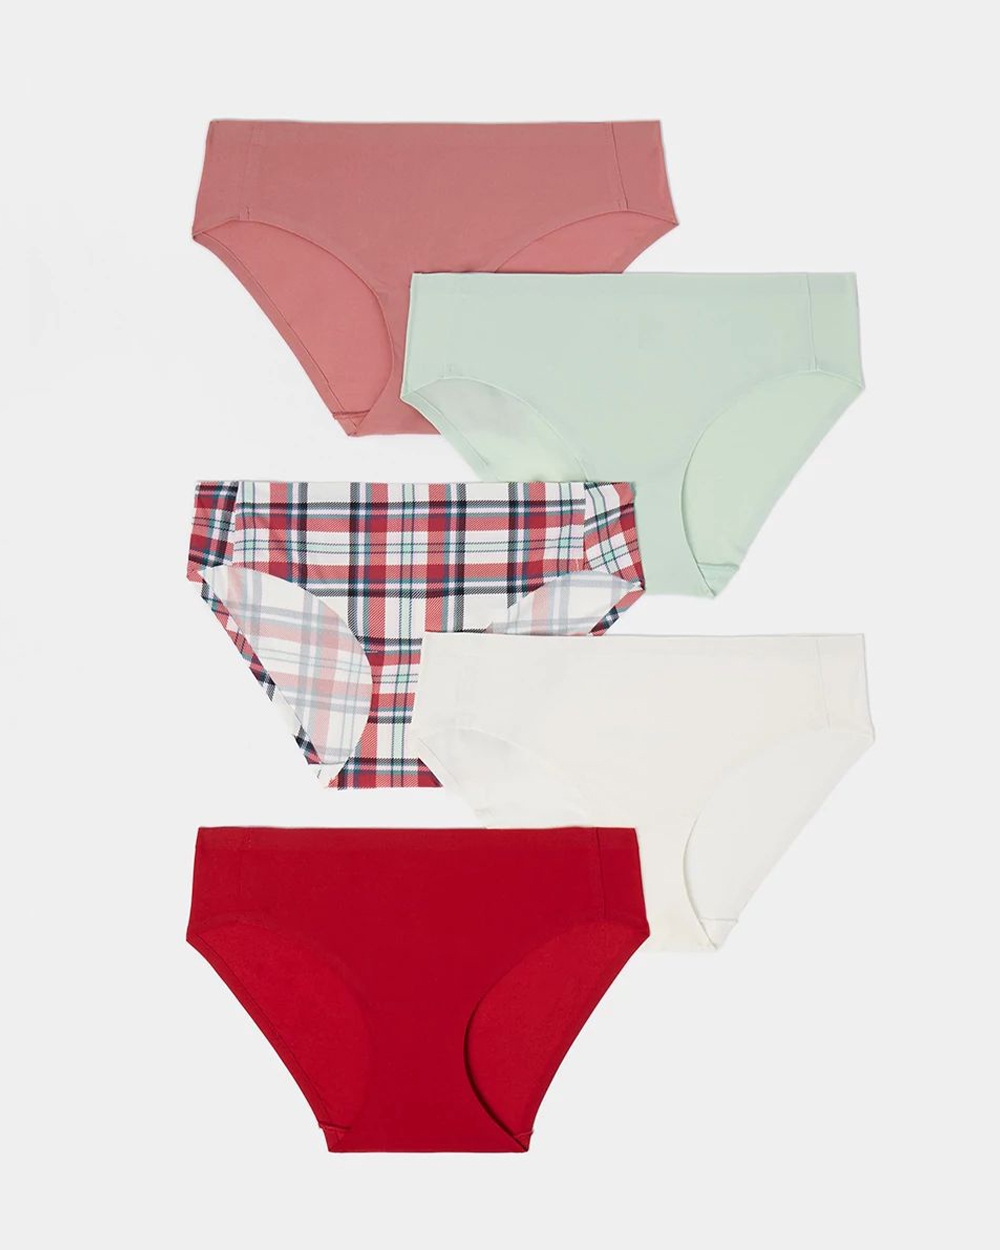 Soma<sup class=st-superscript>®</sup> laydown of cascading solid pink, light green, white, red, and red plaid panties.